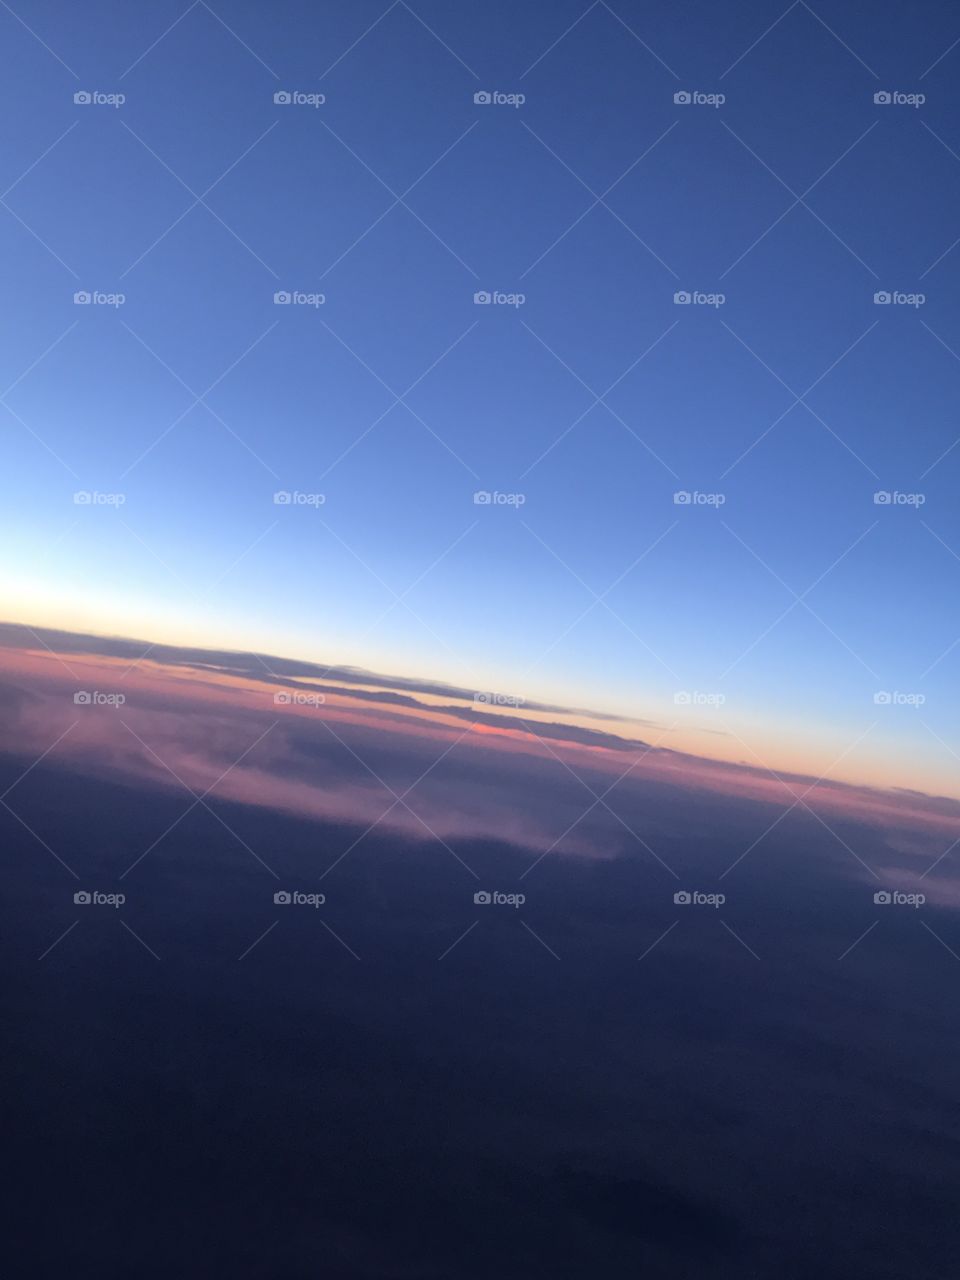 Earth and sky colliding. Beautiful skyline and colors. Taken upon arrival cabin signal. 